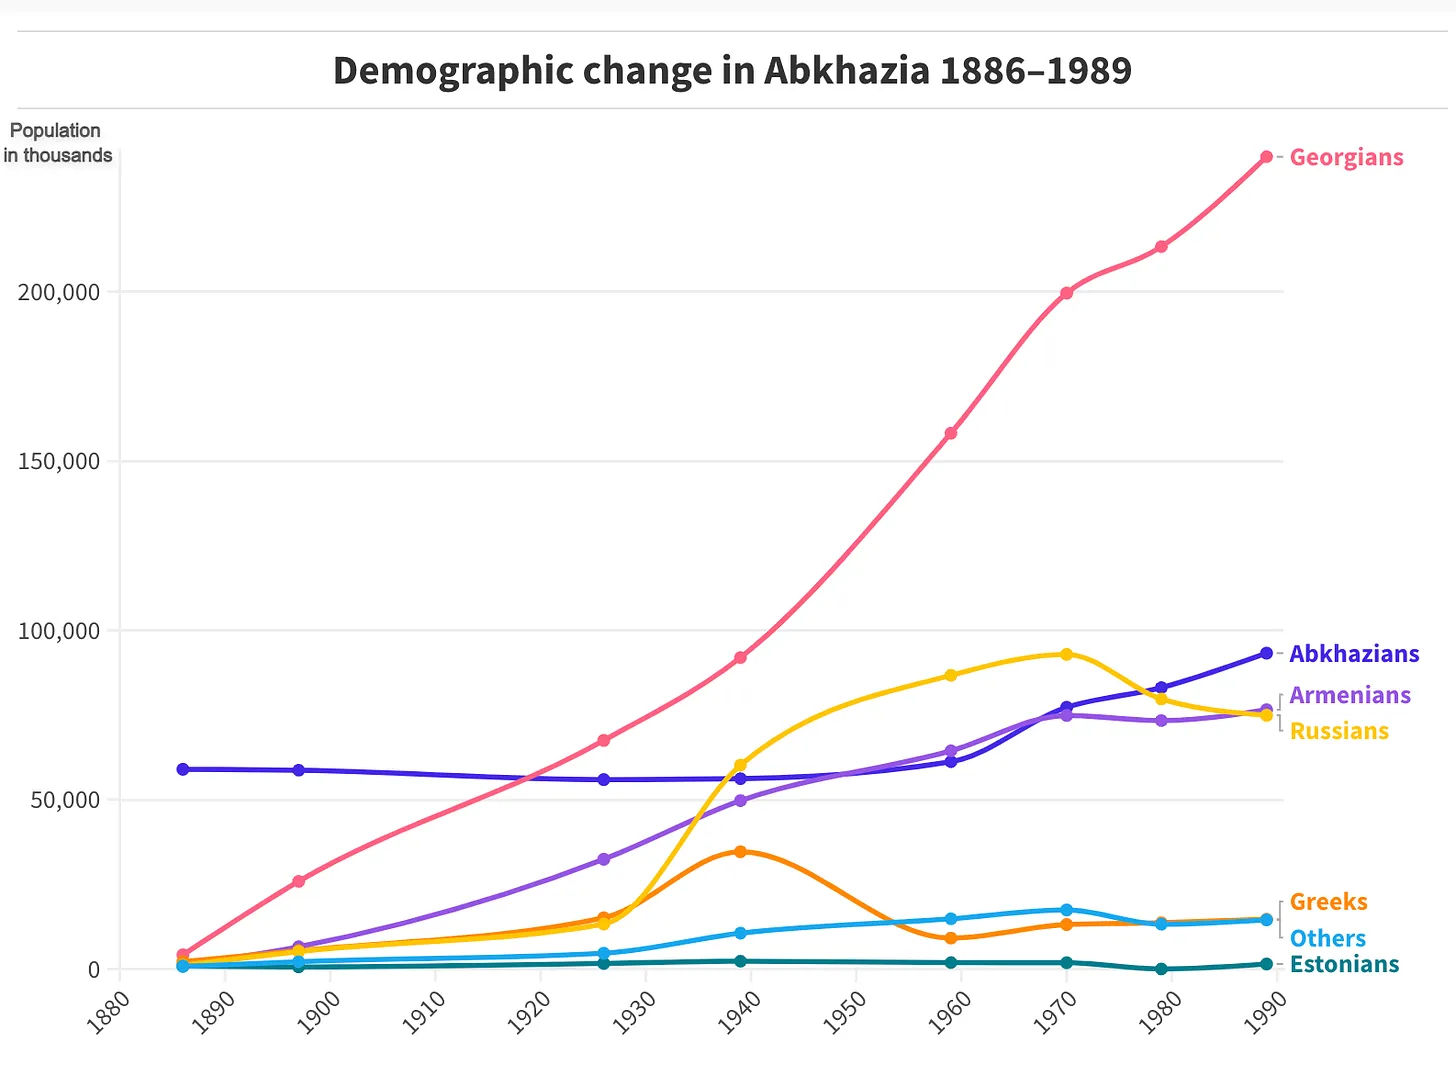 Demographic change in Abkhazia | Sources: Russian, Soviet and Georgian population censuses and ‘Conciliation Resources’ (UK).